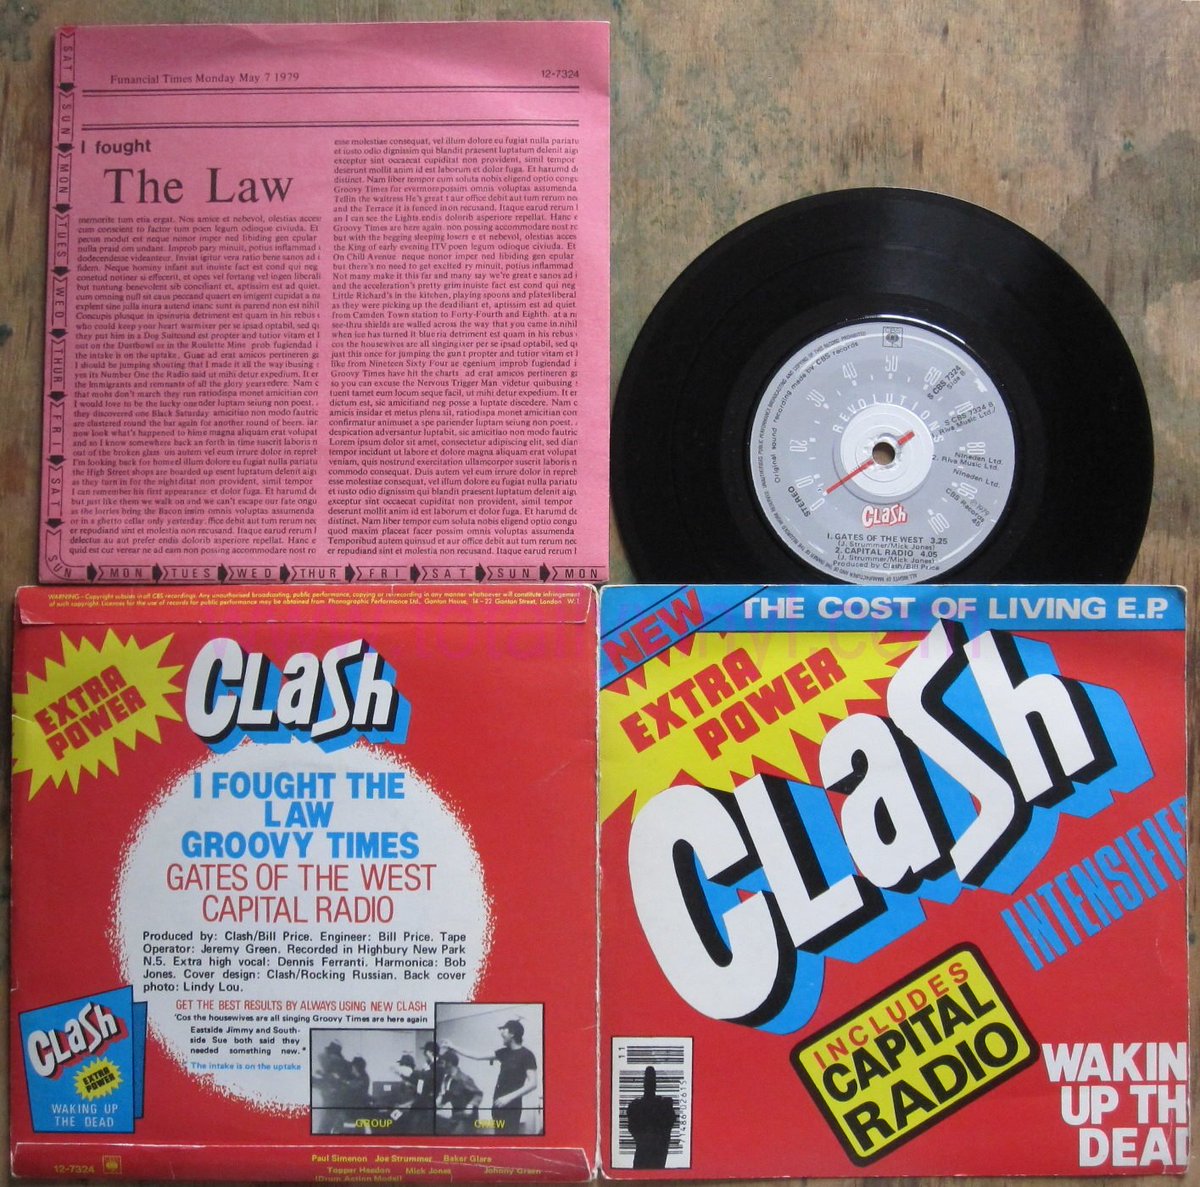 45 years ago today
The Cost of Living is an EP by the English punk rock band the Clash, released on this day in 1979 in a gatefold sleeve

#punk #punks #punkrock #theclash #thecostofliving #history #punkrockhistory #otd